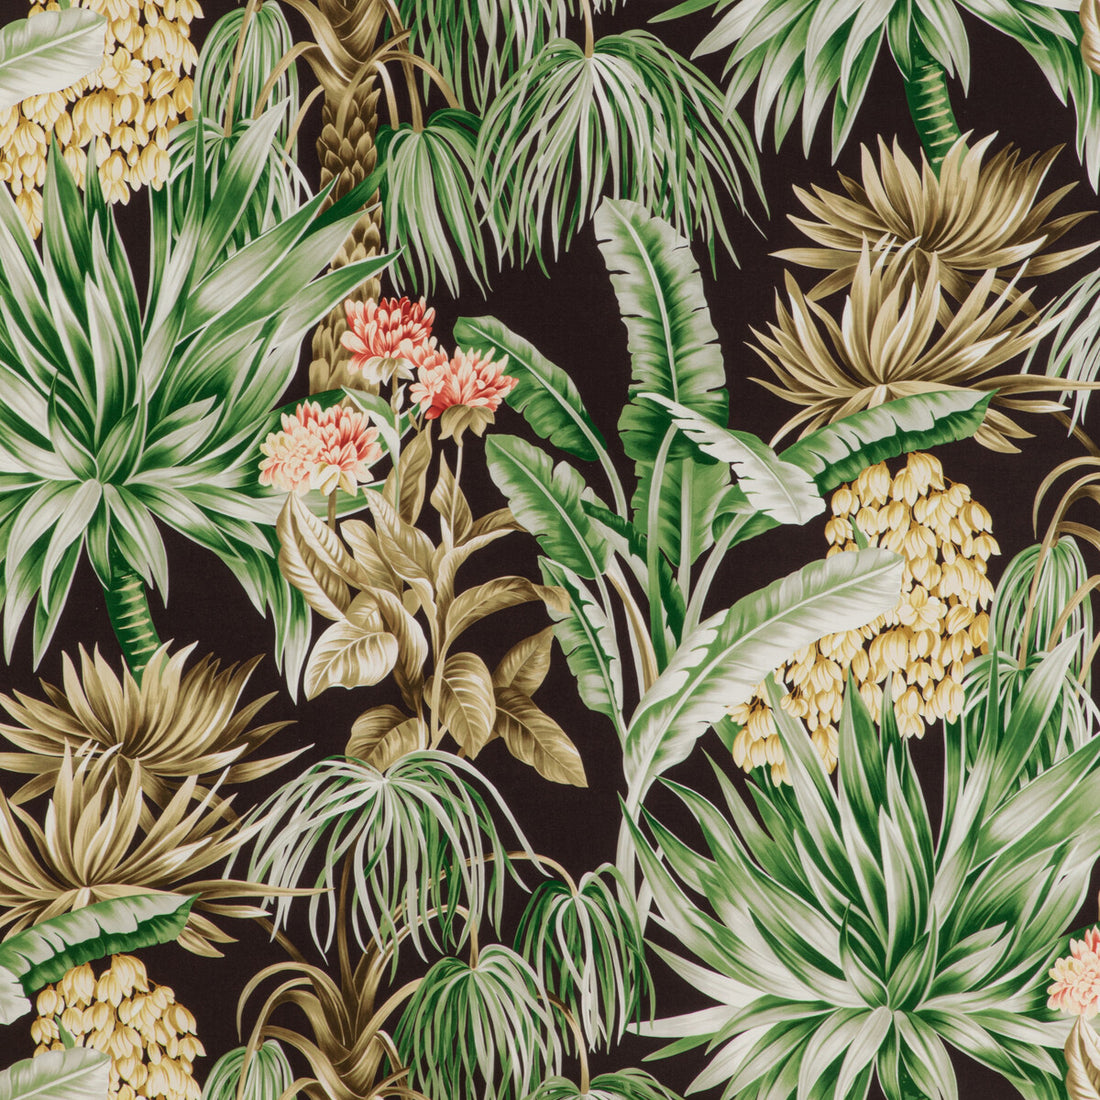 Caluya Print fabric in espresso color - pattern 2020196.6374.0 - by Lee Jofa in the Mindoro collection